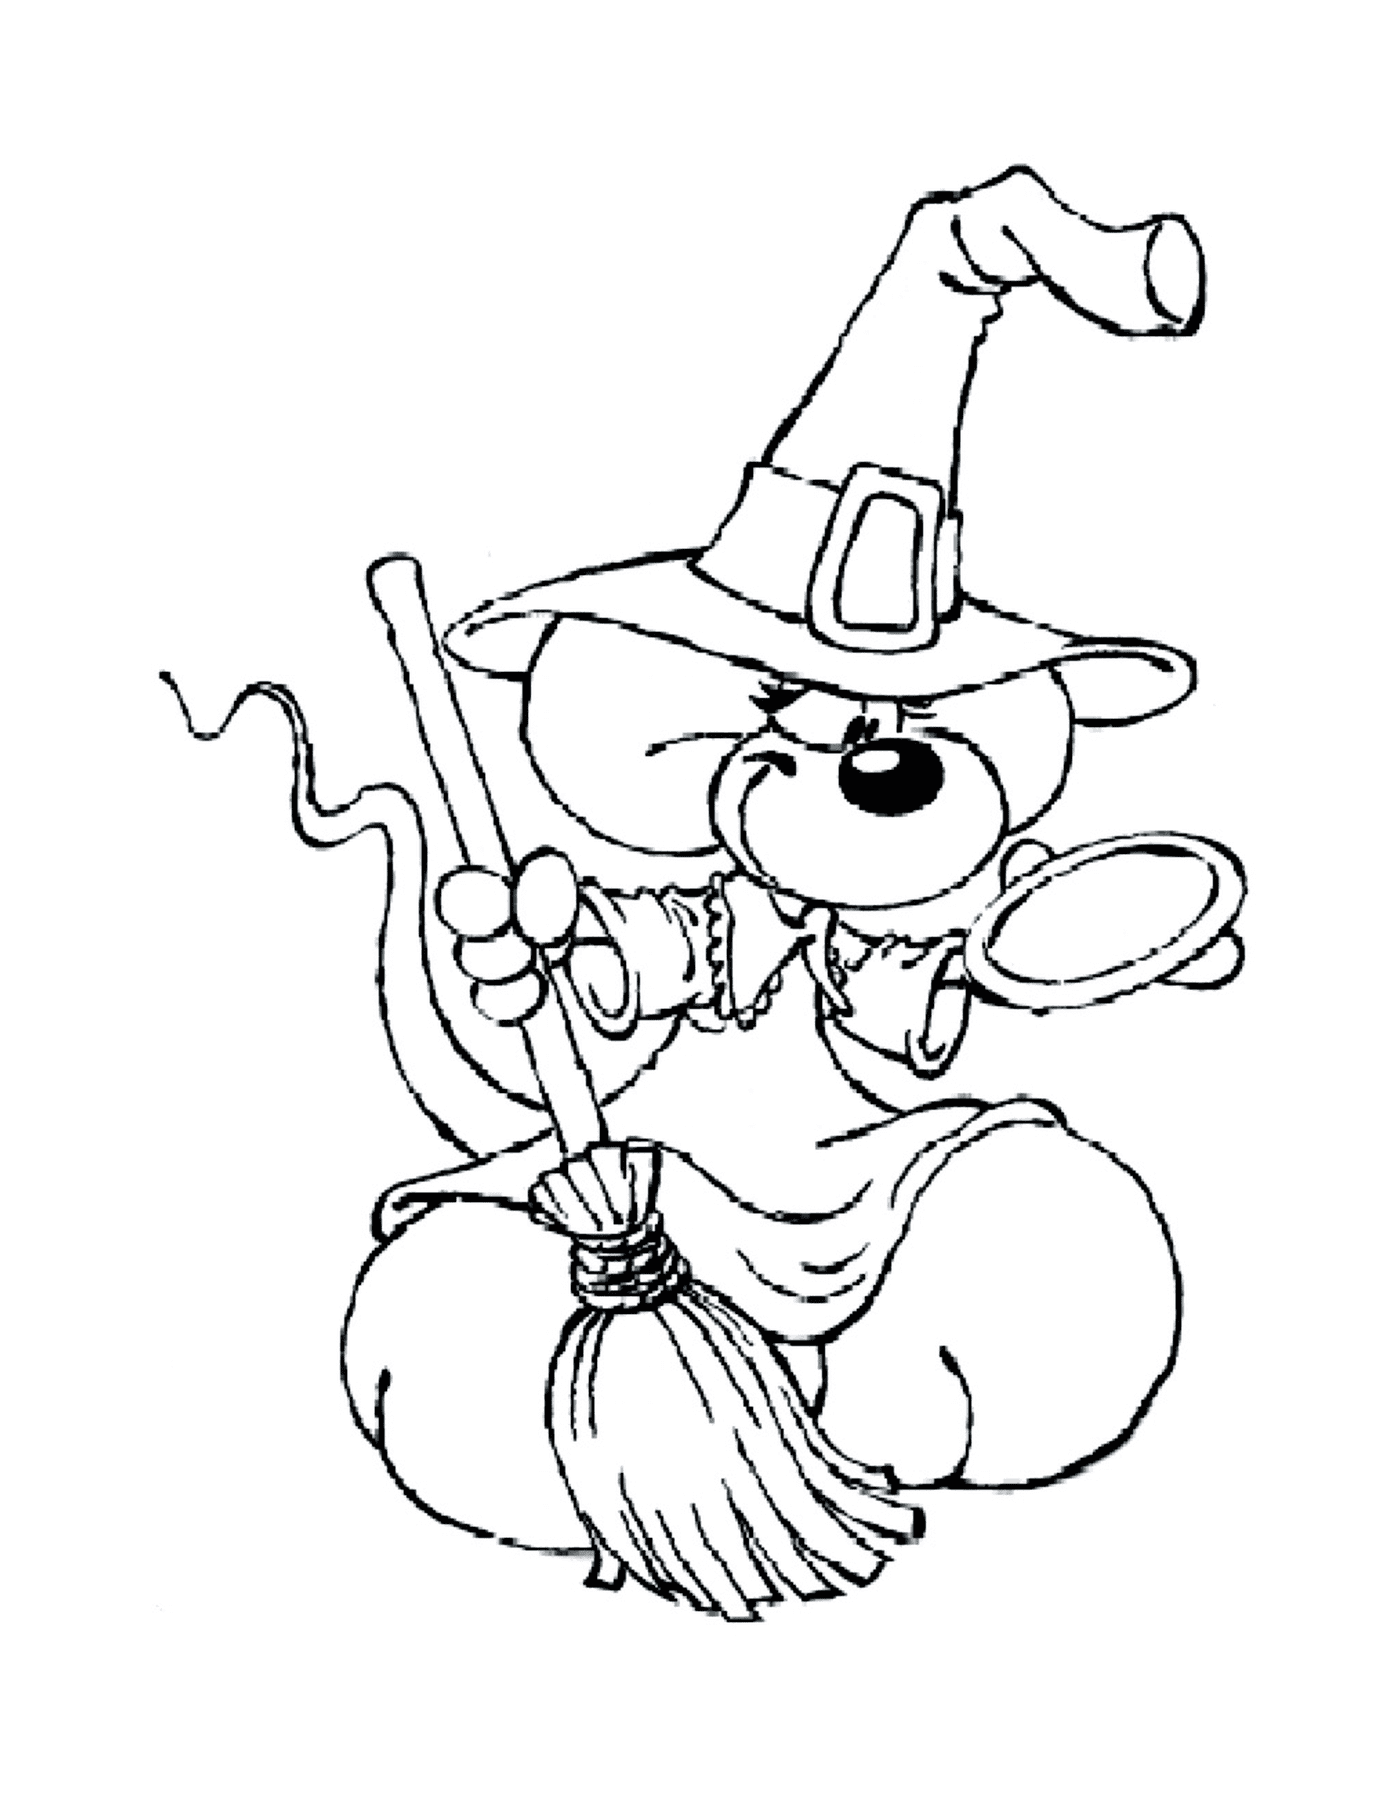  A teddy bear with a witch's hat 